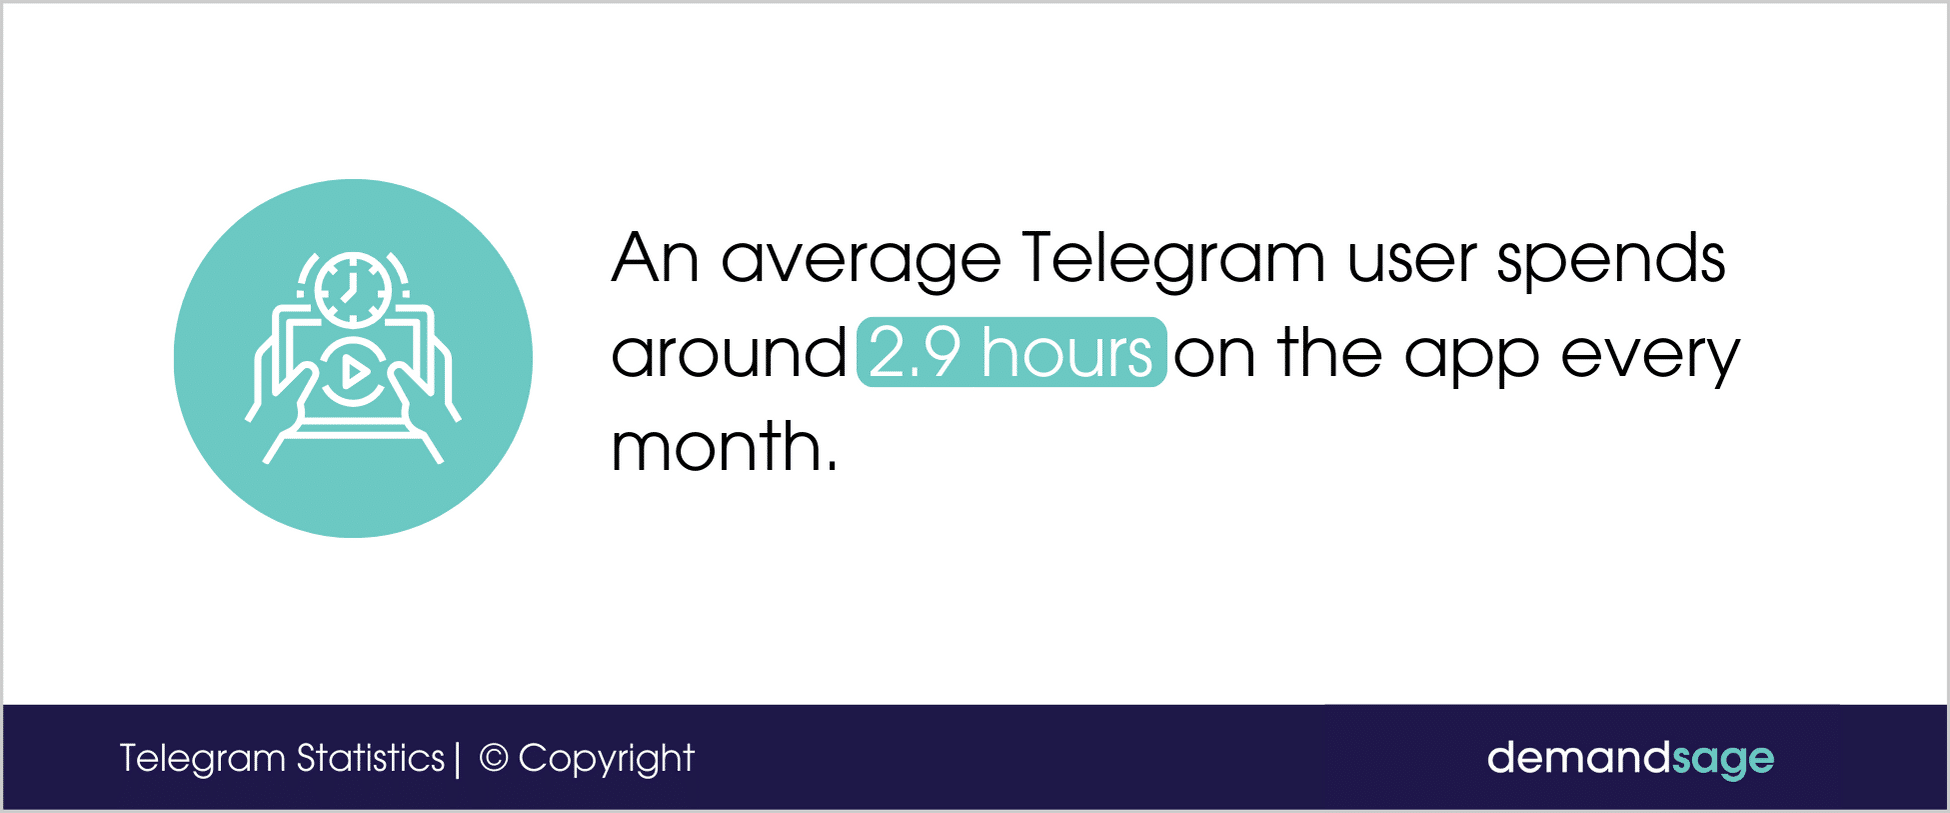 An average Telegram user spends around 2.9 hours on the app every month